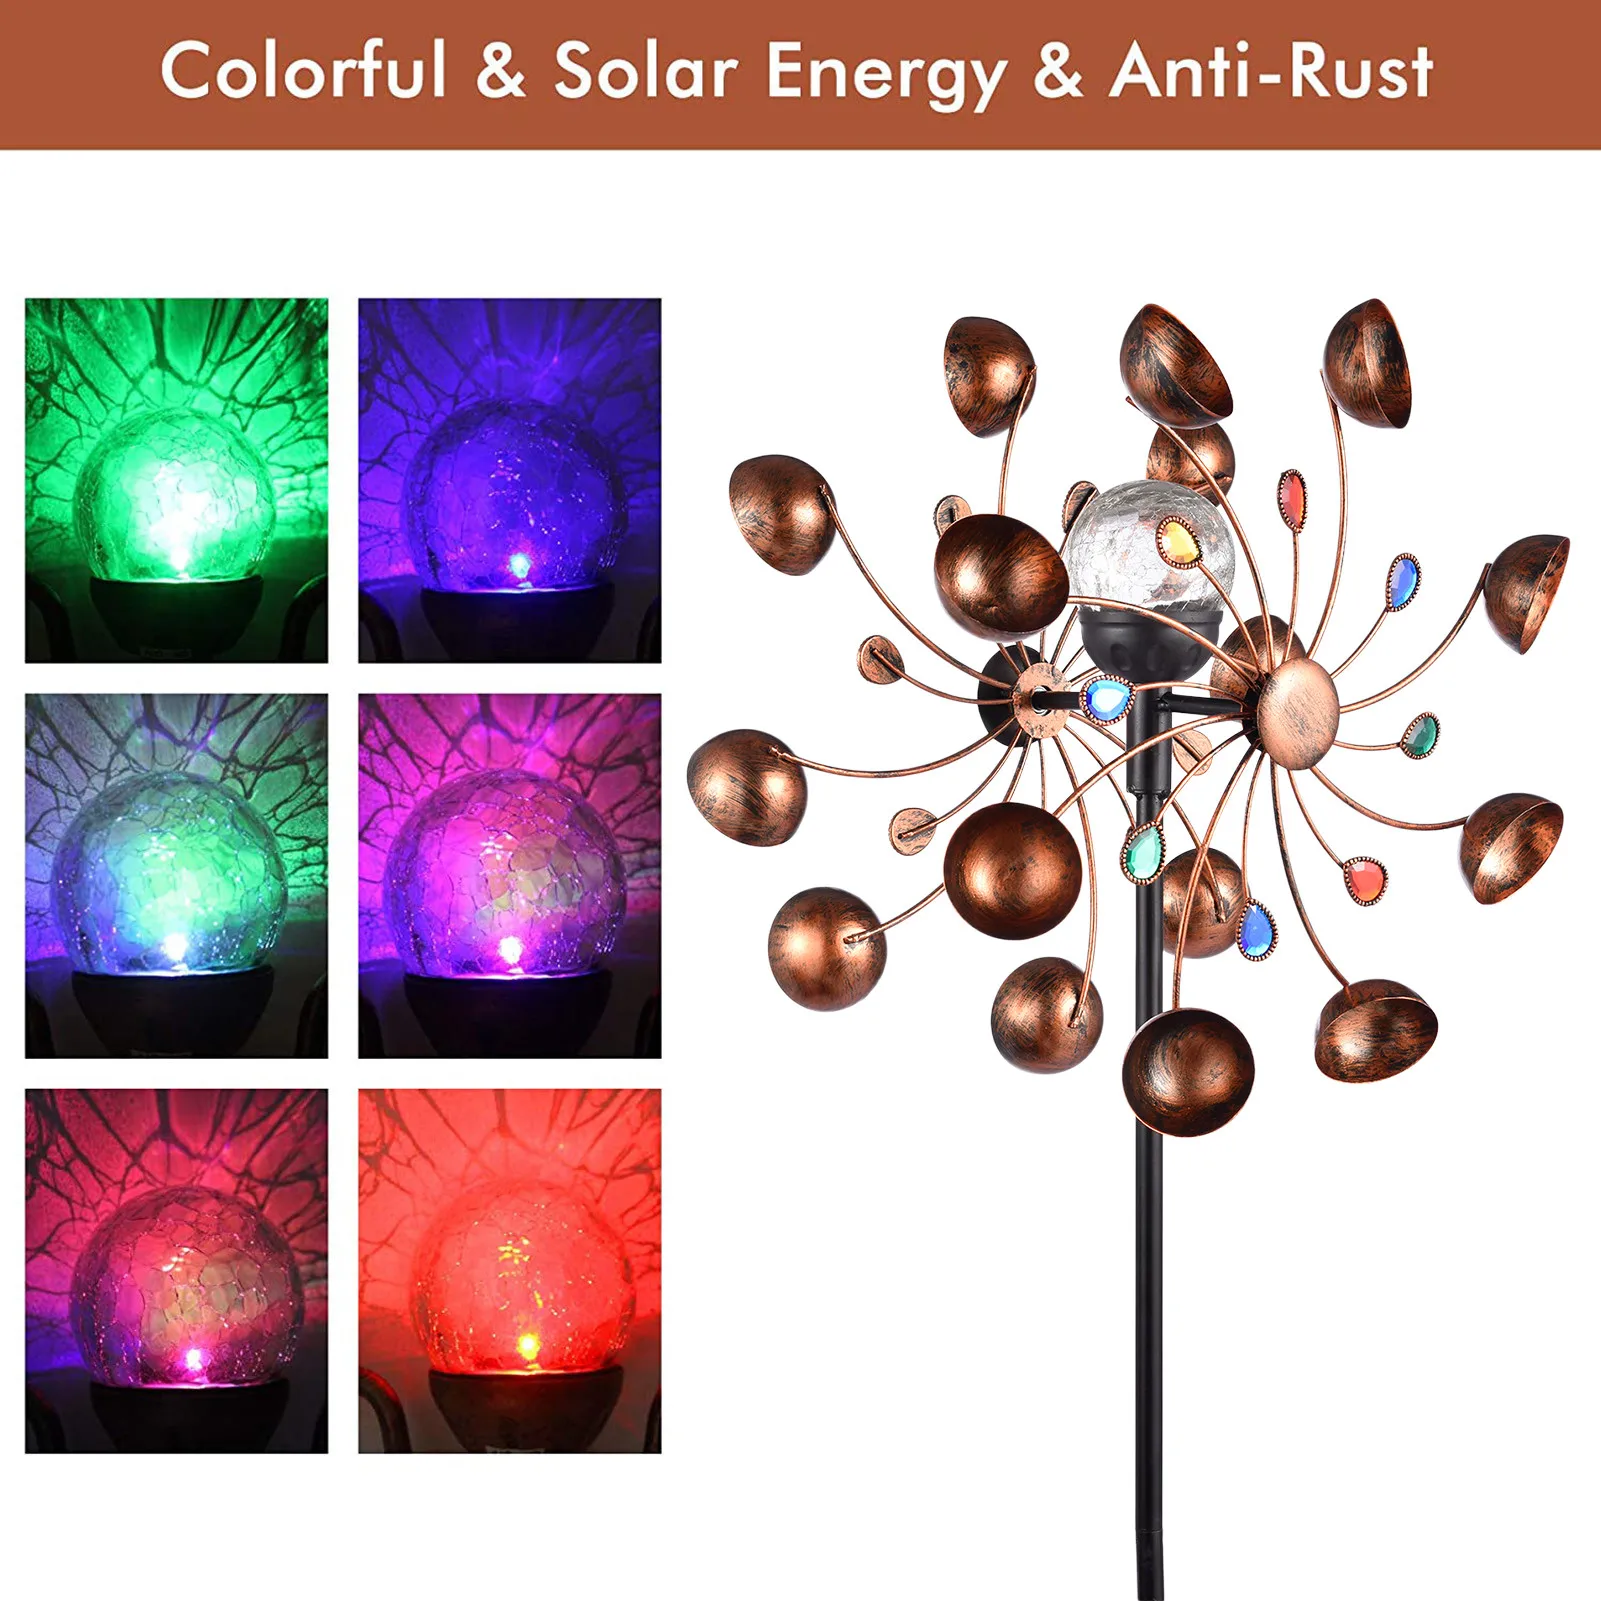 Large Metal Solar Powered Wind Spinner LED Multi-Color Light Windmill Stake Outdoor Garden Yard Lawn Art Decor Accessories Tool